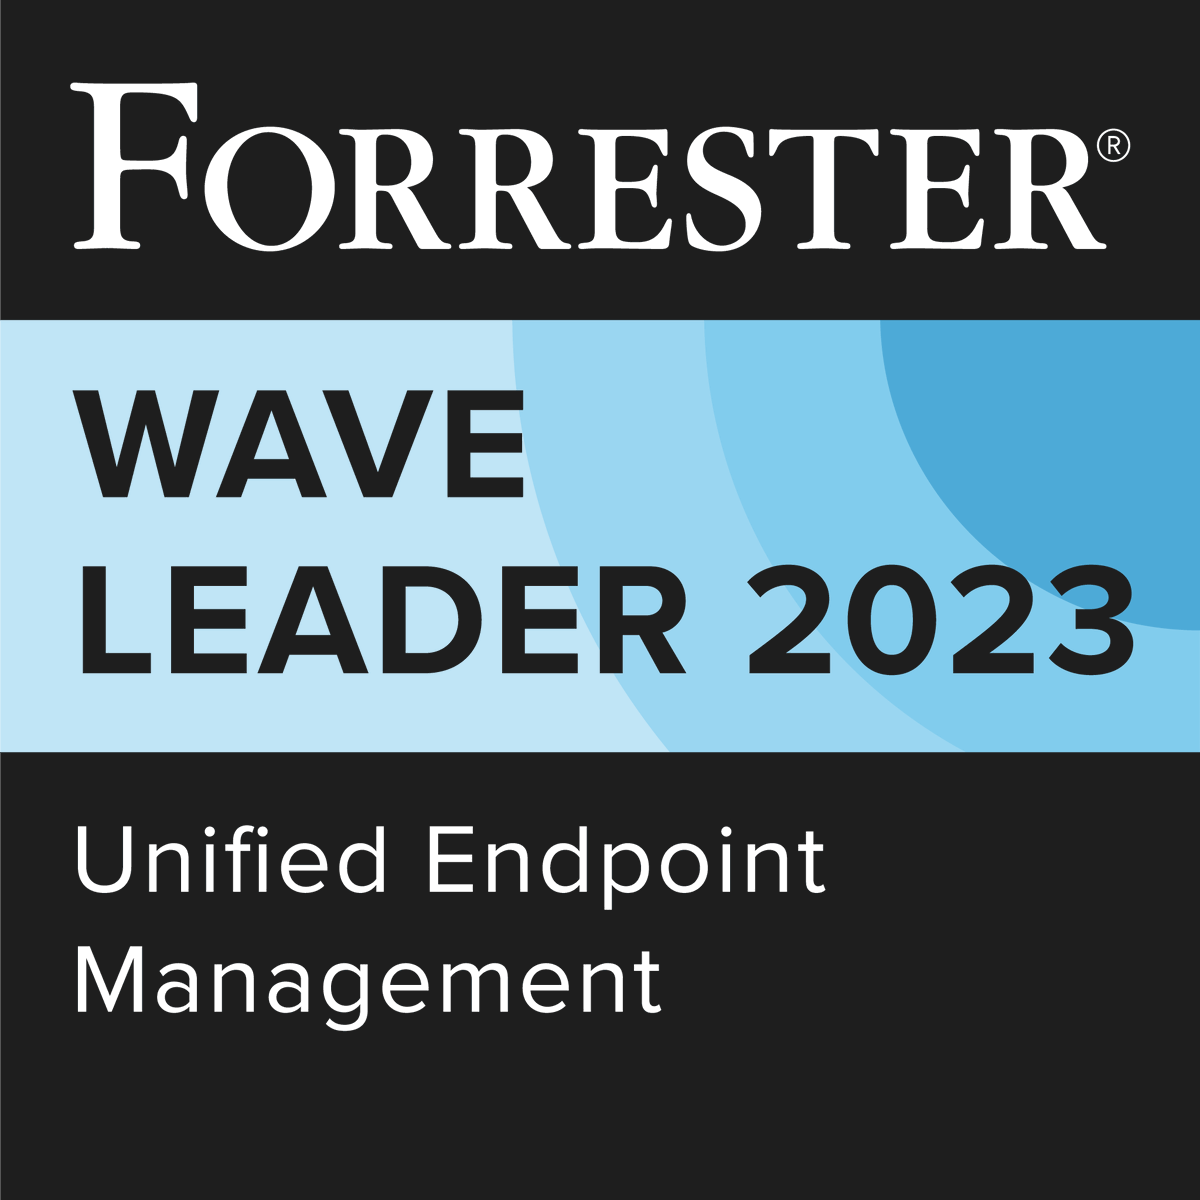 Microsoft Intune has been recognized as a Leader in The Forrester Wave™: Unified Endpoint Management, Q4 2023 report! Learn how Microsoft Intune simplifies management, reduces costs, and transforms experiences with AI and automation: msft.it/6014ize1O #EndpointSecurity